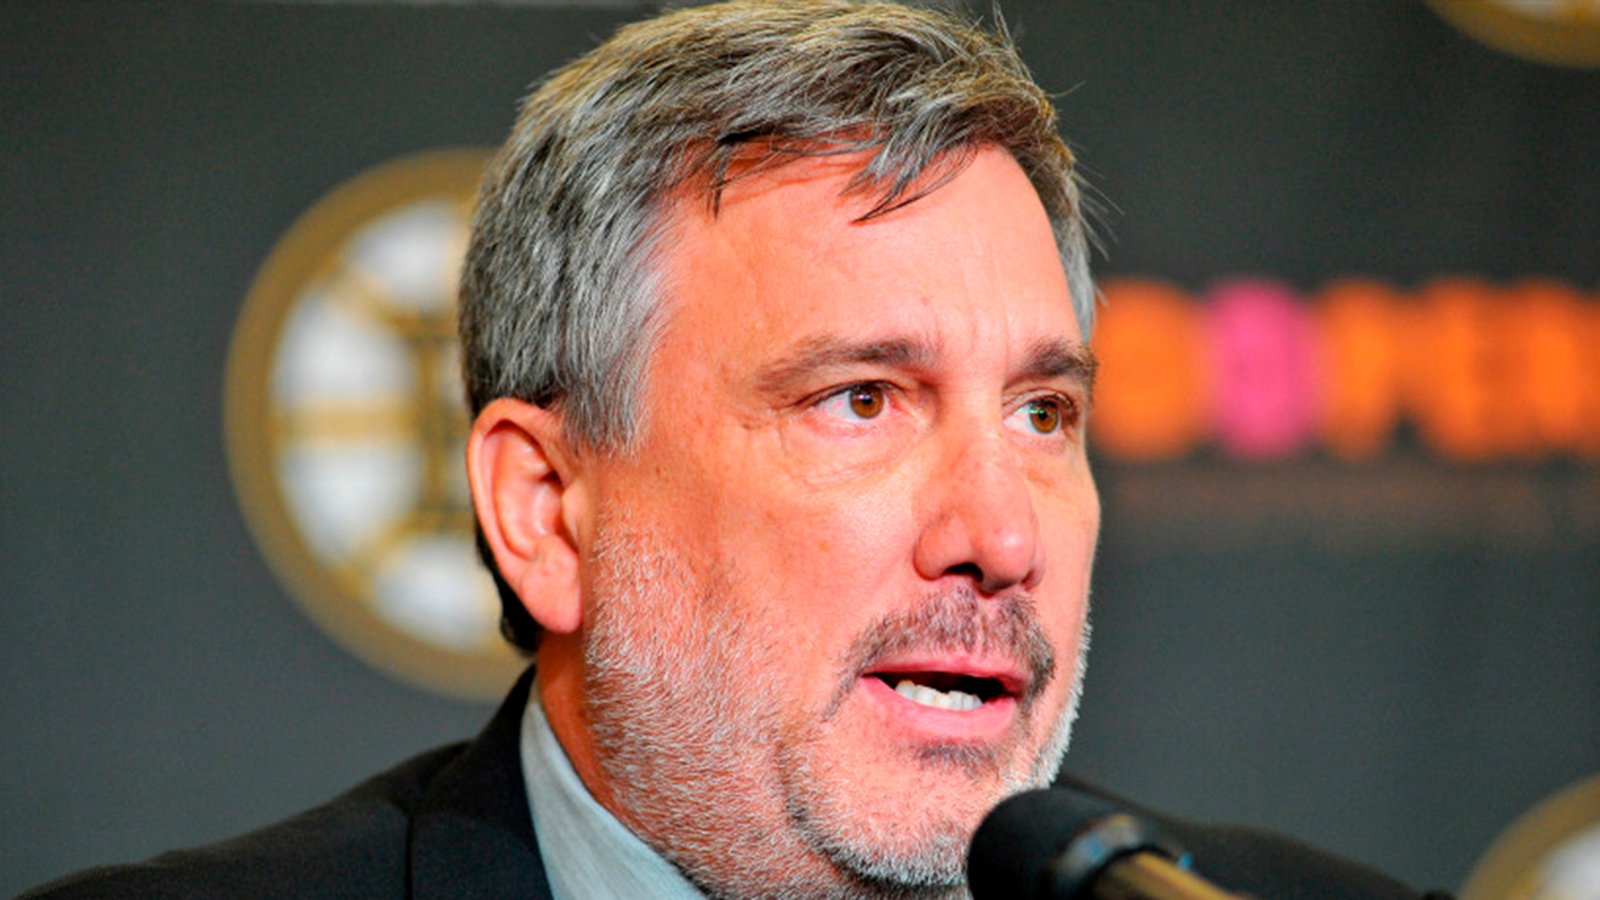 Bruins president Neely rips team after brutal 5-0 loss to Panthers